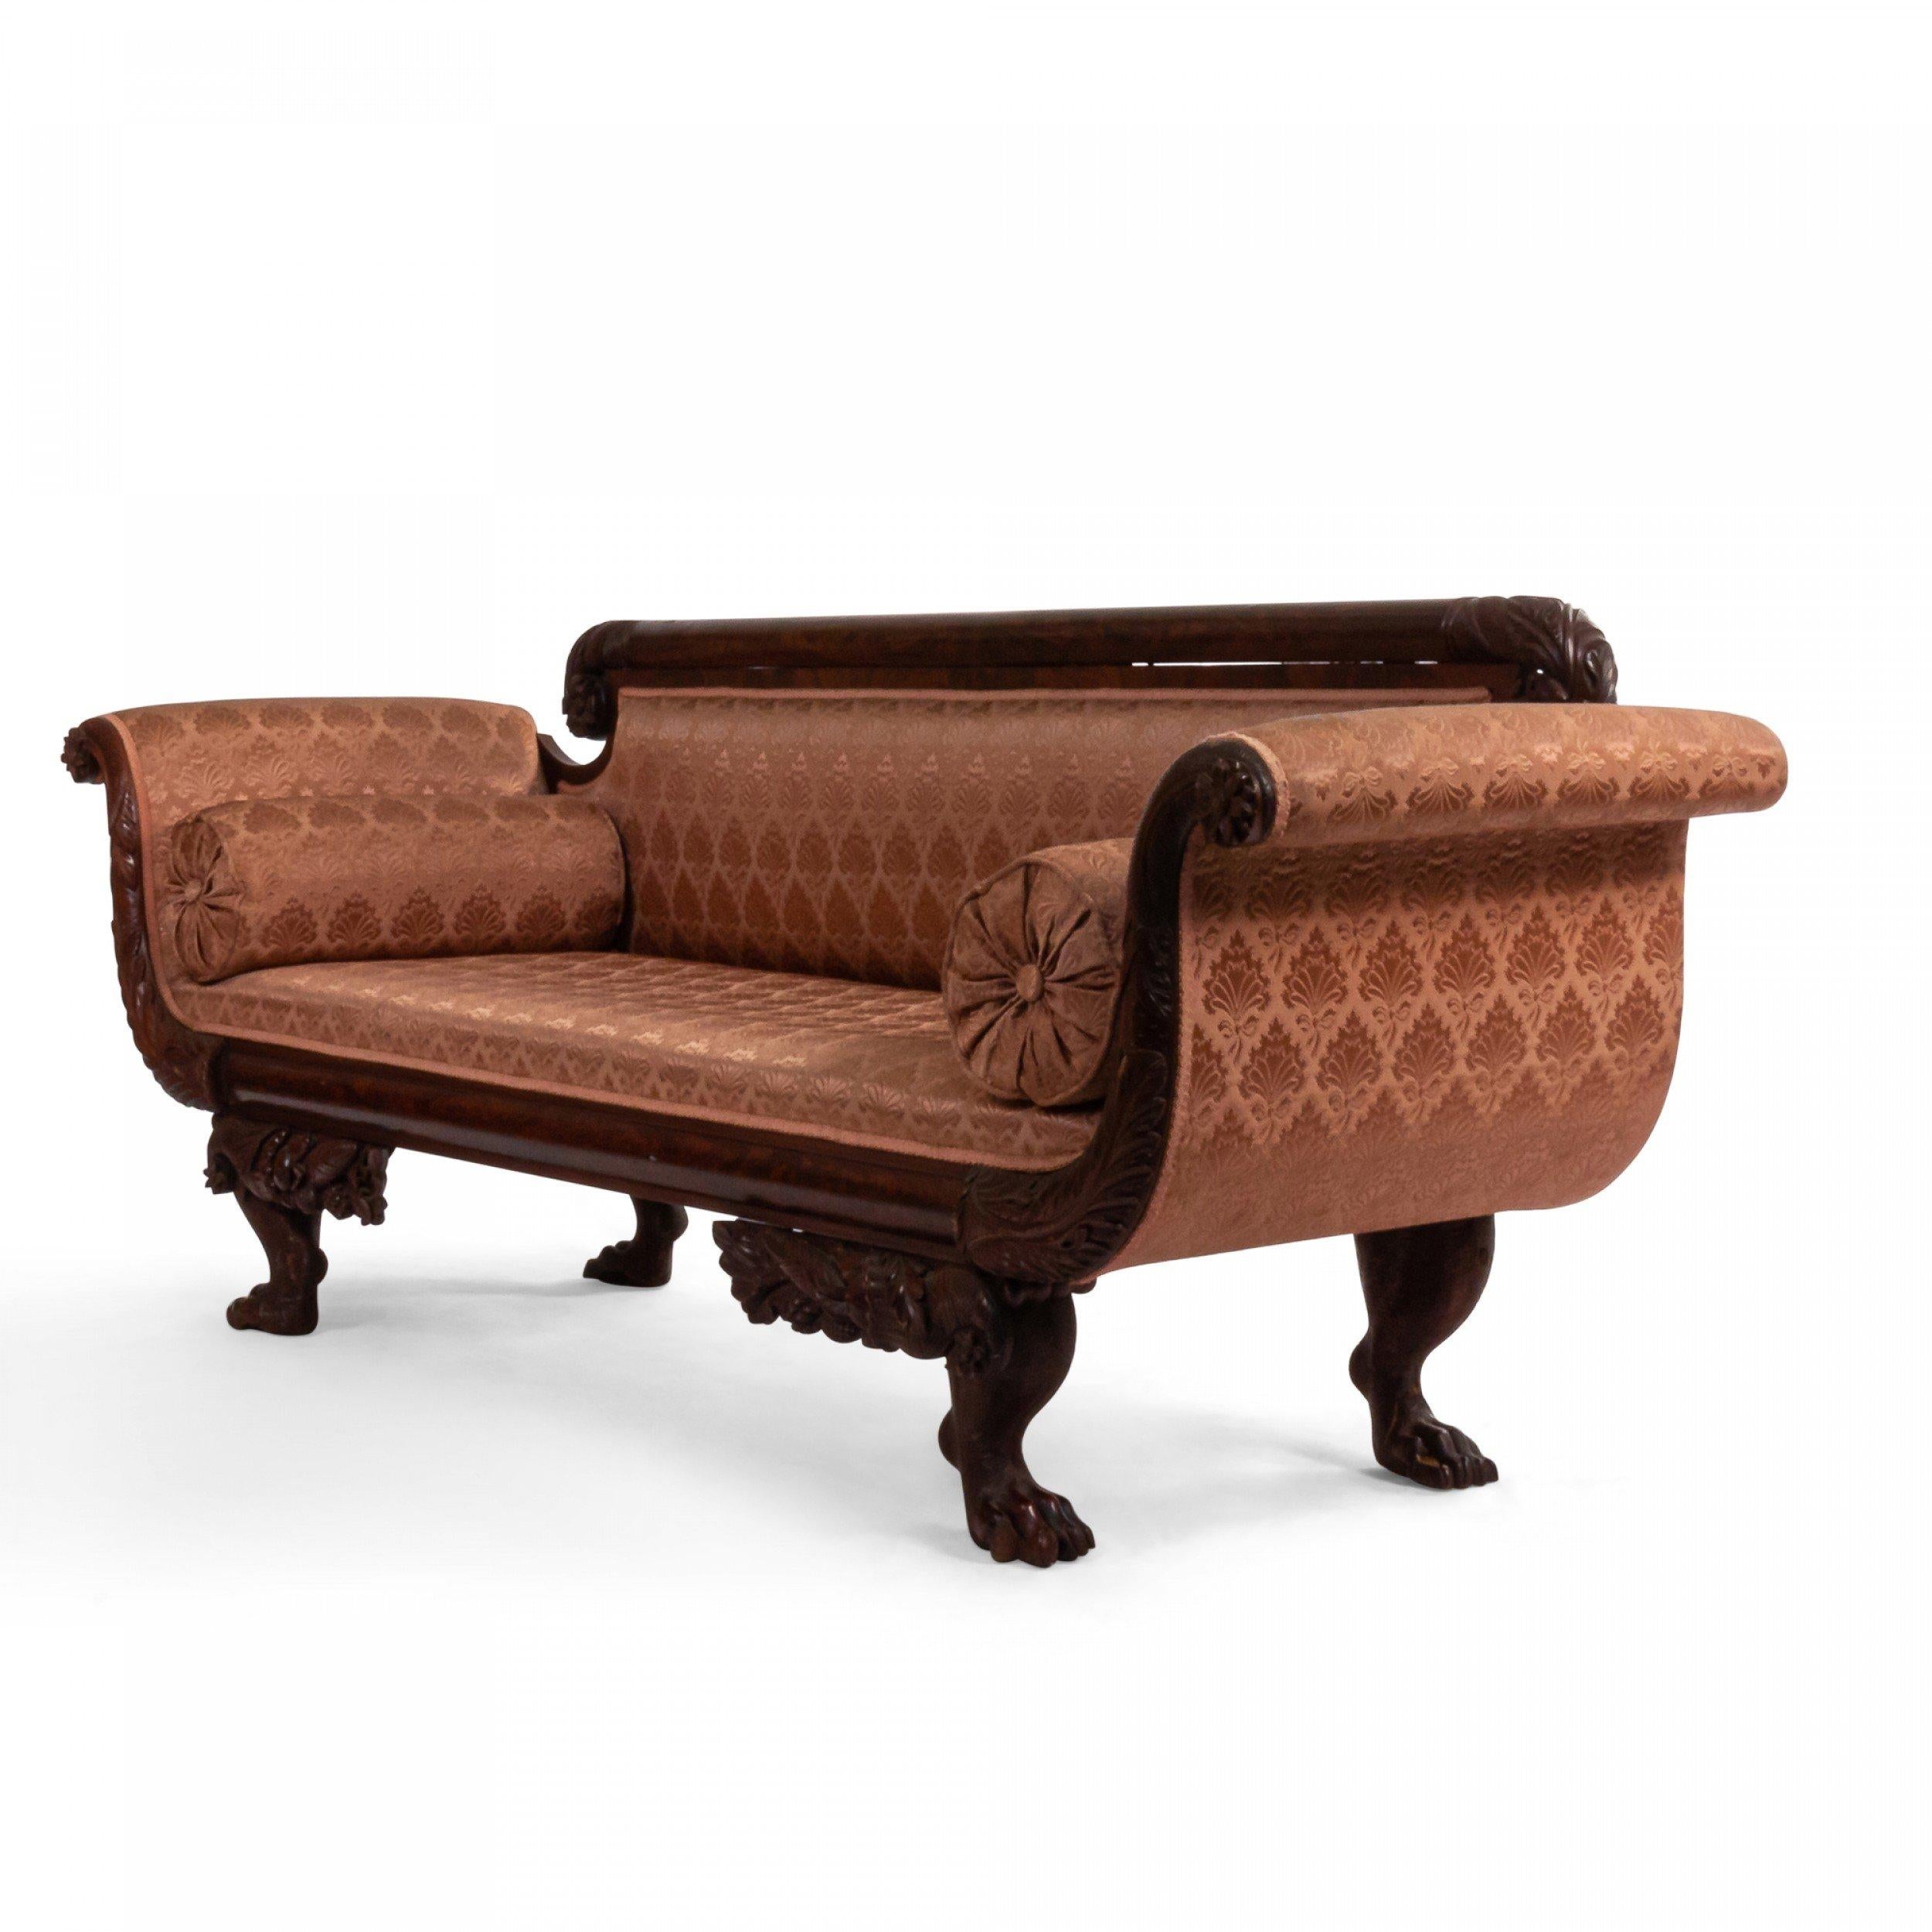 American Empire Style Mahogany Sofa with Peach Upholstery In Good Condition For Sale In New York, NY